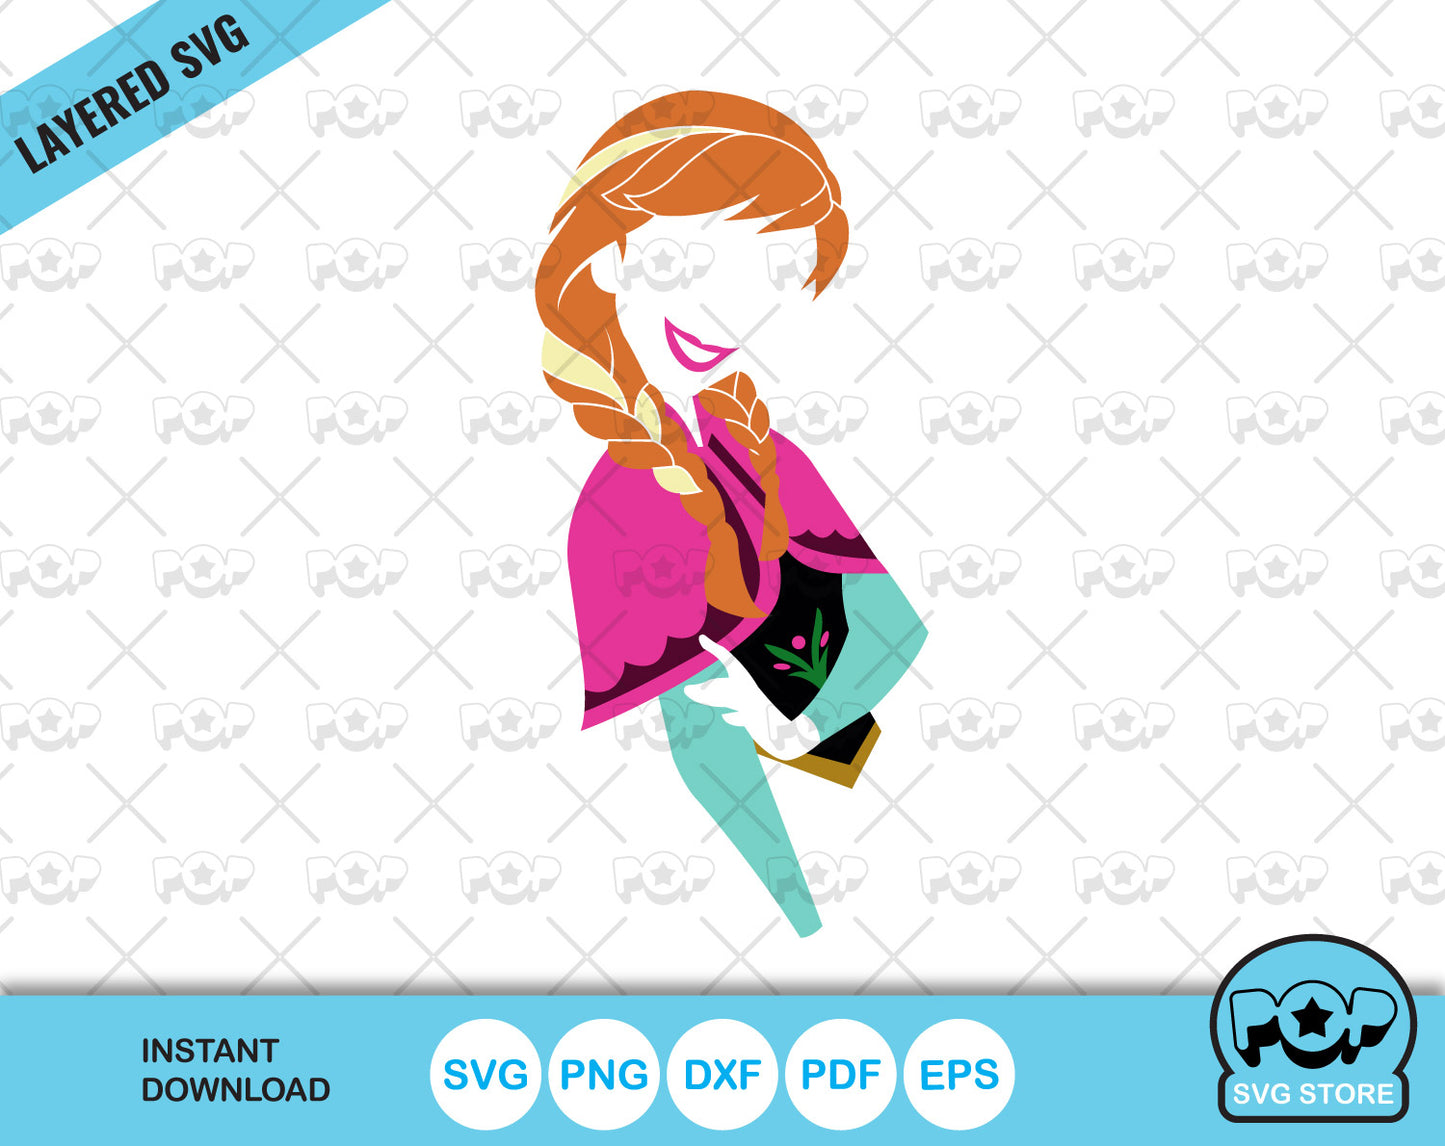 Princess Anna clipart, SVG cutting files for cricut silhouette, SVG, PNG, DXF, instant download